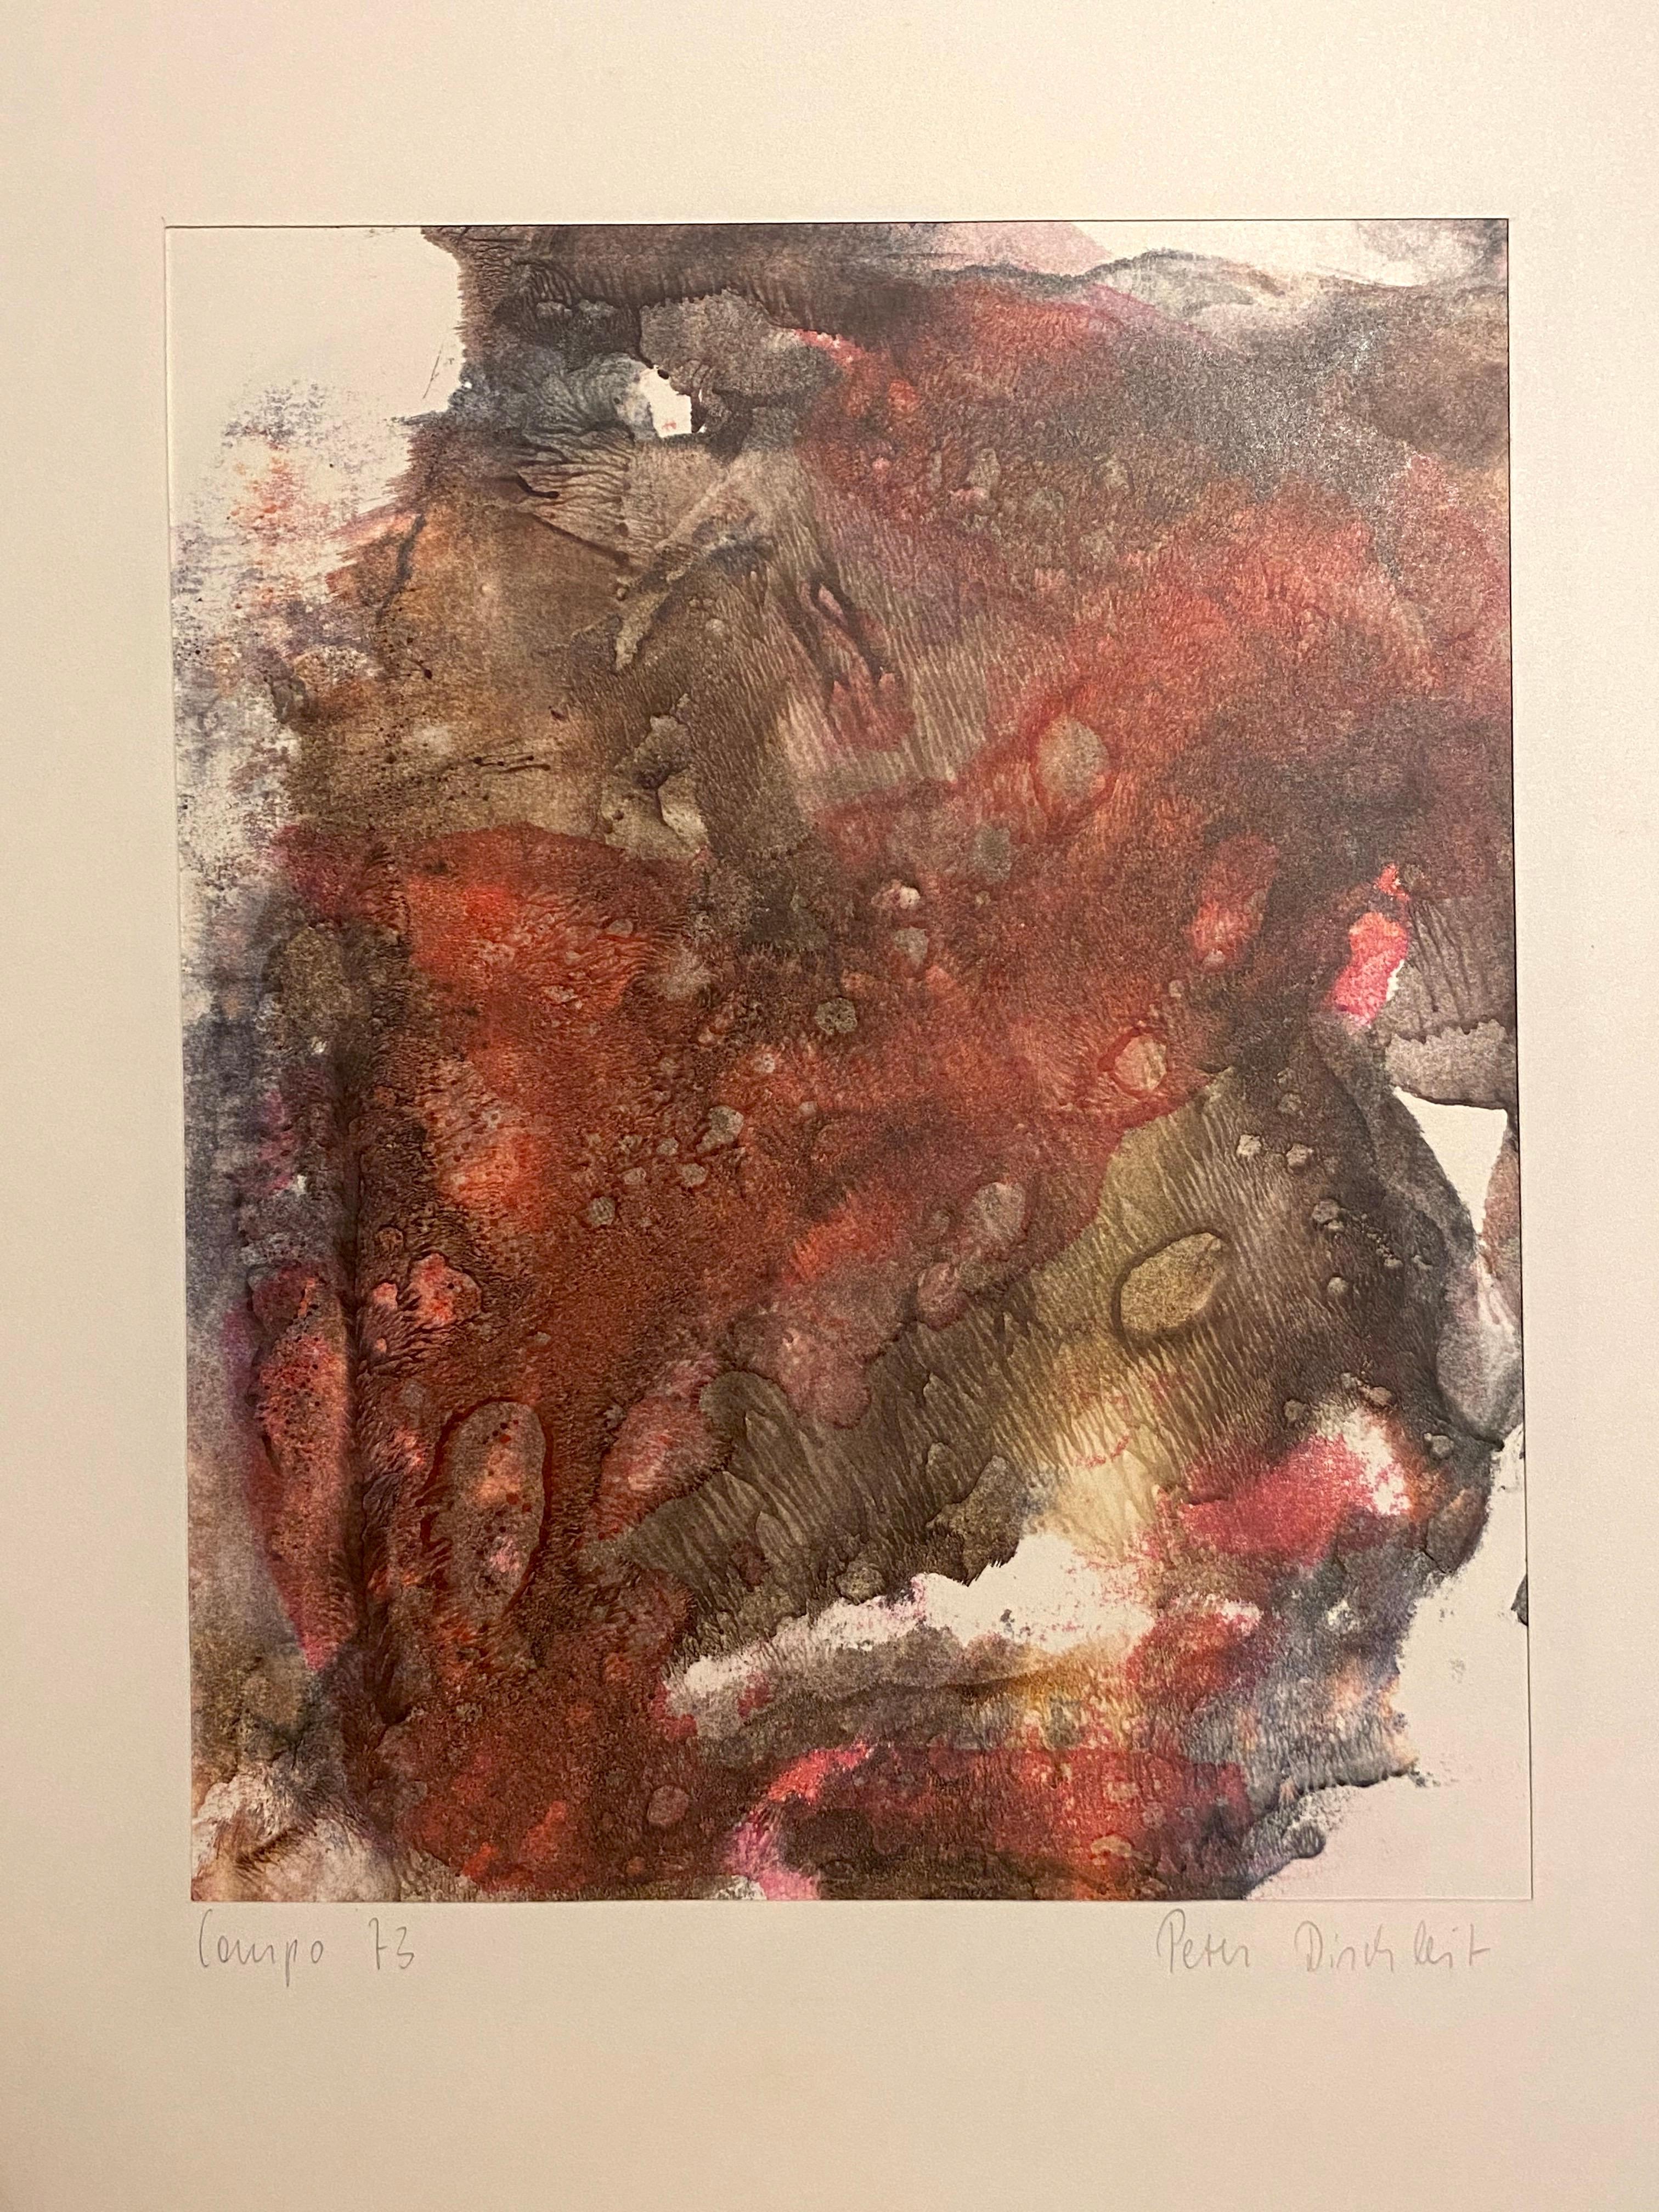 Abstract Composition is an original mixed media drawing in ink and watercolor on paper realized by Peter Dischleit (1940-1993) in 1973.

Hand-signed in pencil on the lower right margin and dated on the lower left margin.

Good conditions. Included